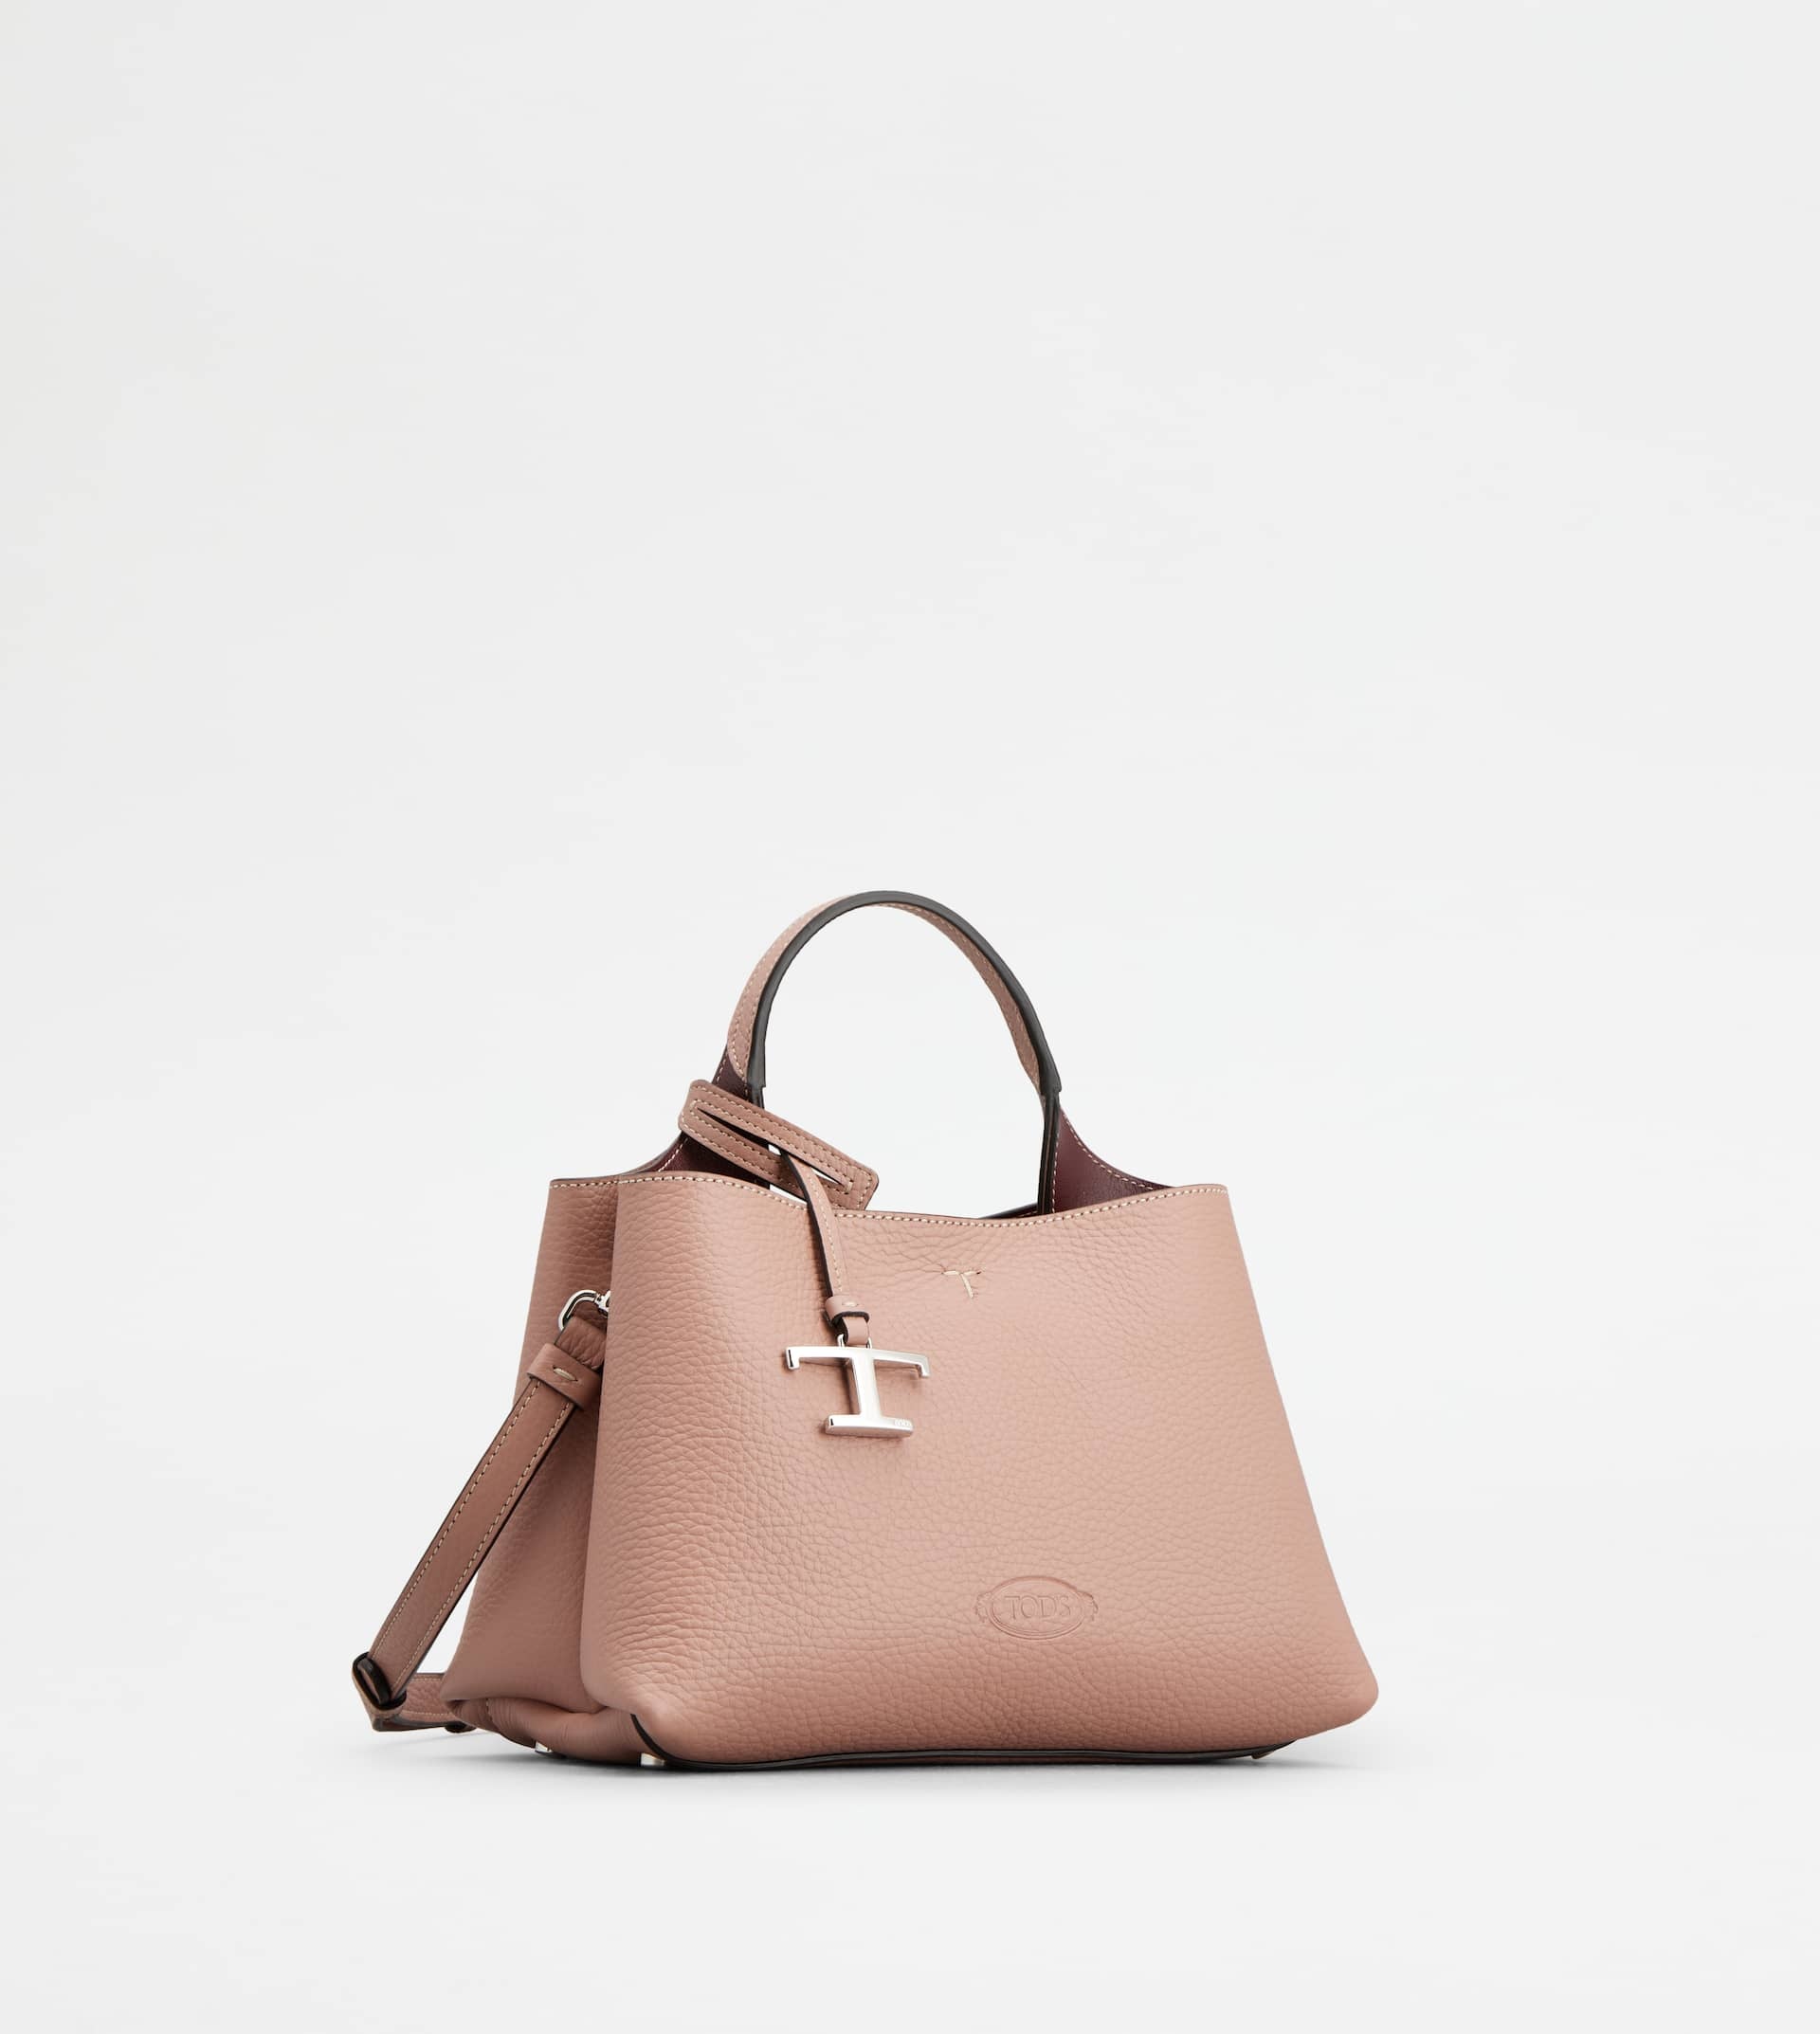 BAG IN LEATHER MICRO - BURGUNDY, PINK - 2